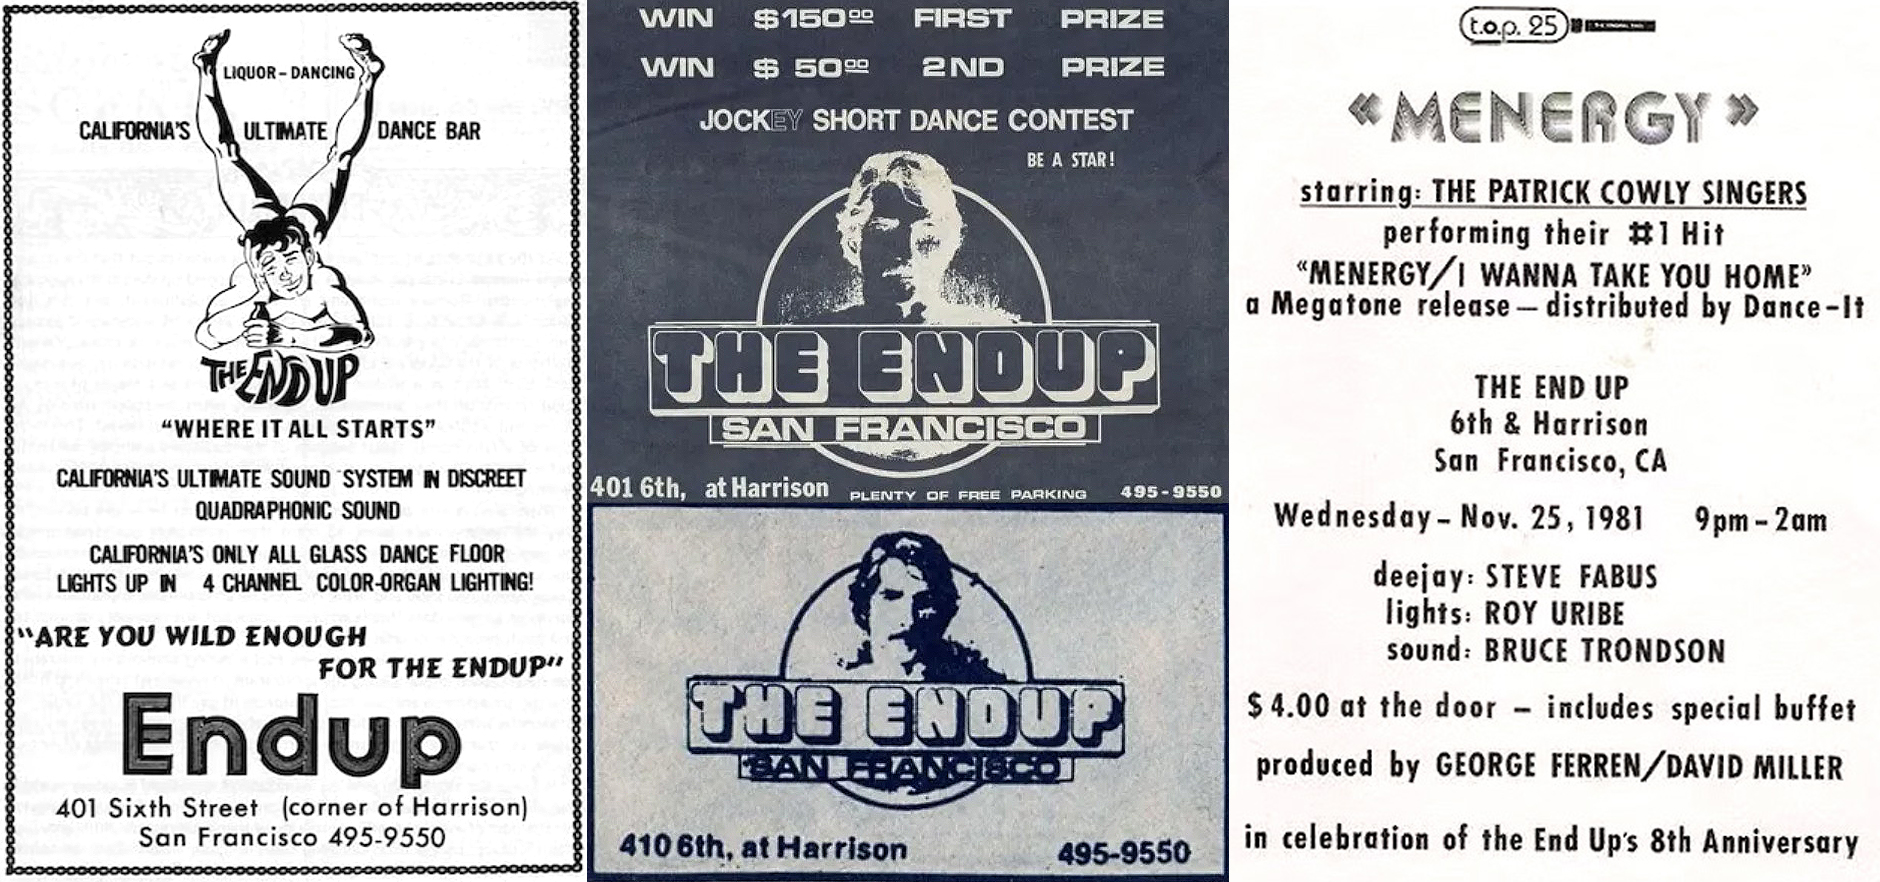 End Up ads including a flyer for its 8th Anniversary party (1981) featuring Steve Fabus with producer George Ferren